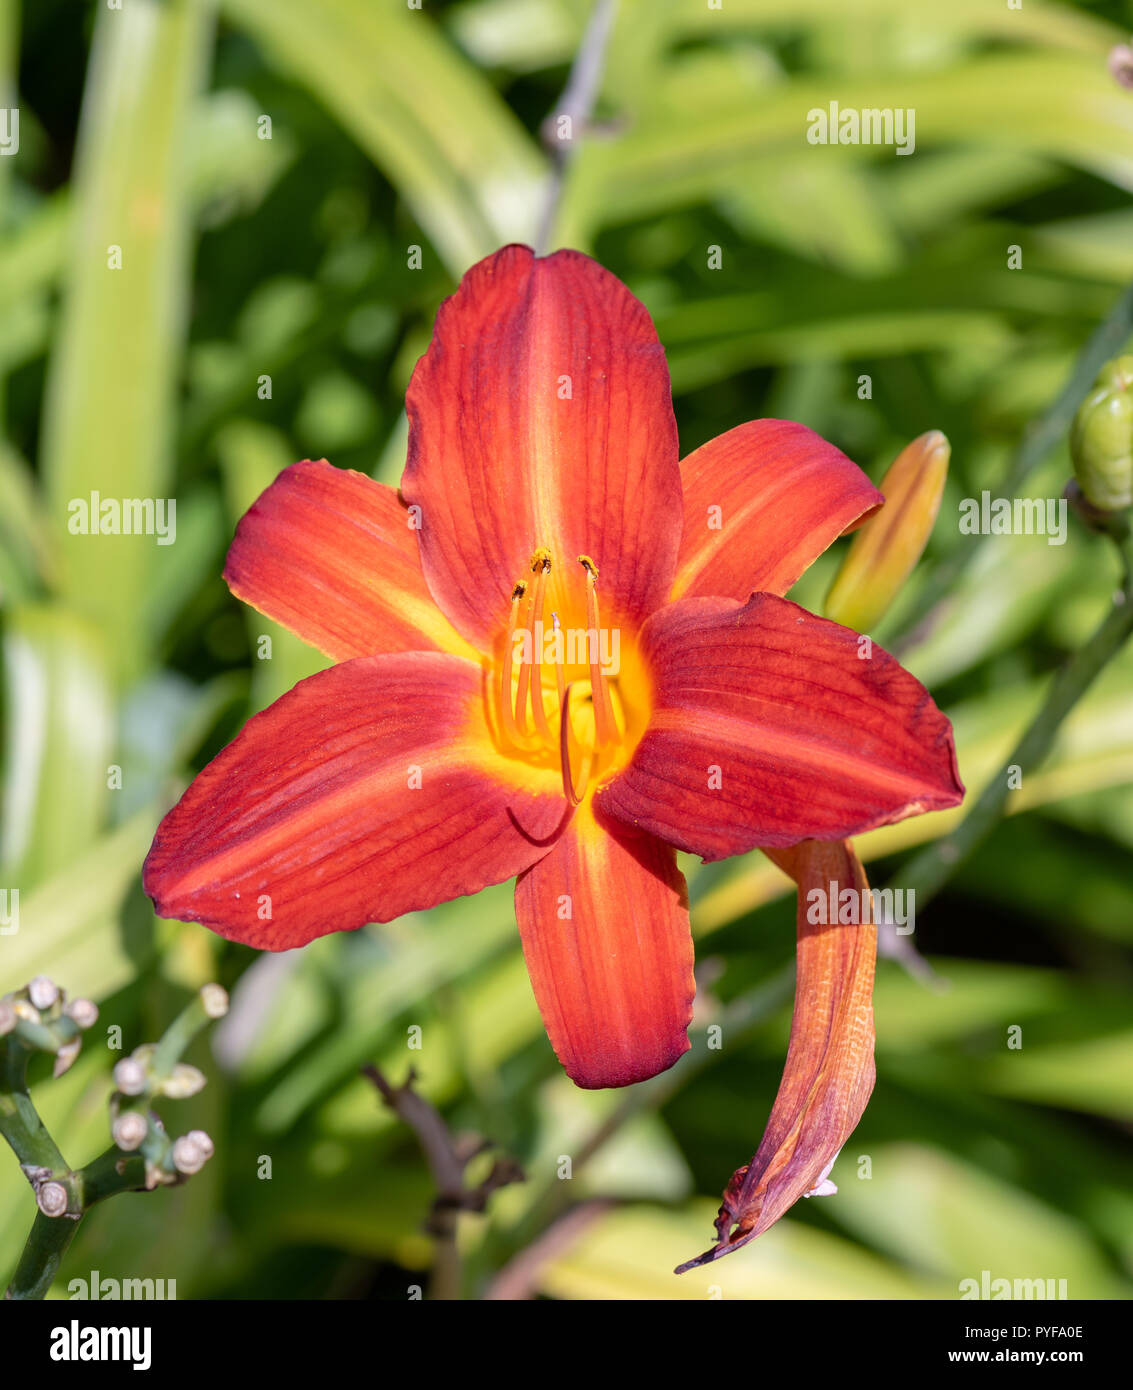 Colorful outdoor nature macro image of a blooming red yellow daylily blossom on a natural green blurred background taken on a bright sunny summer day Stock Photo